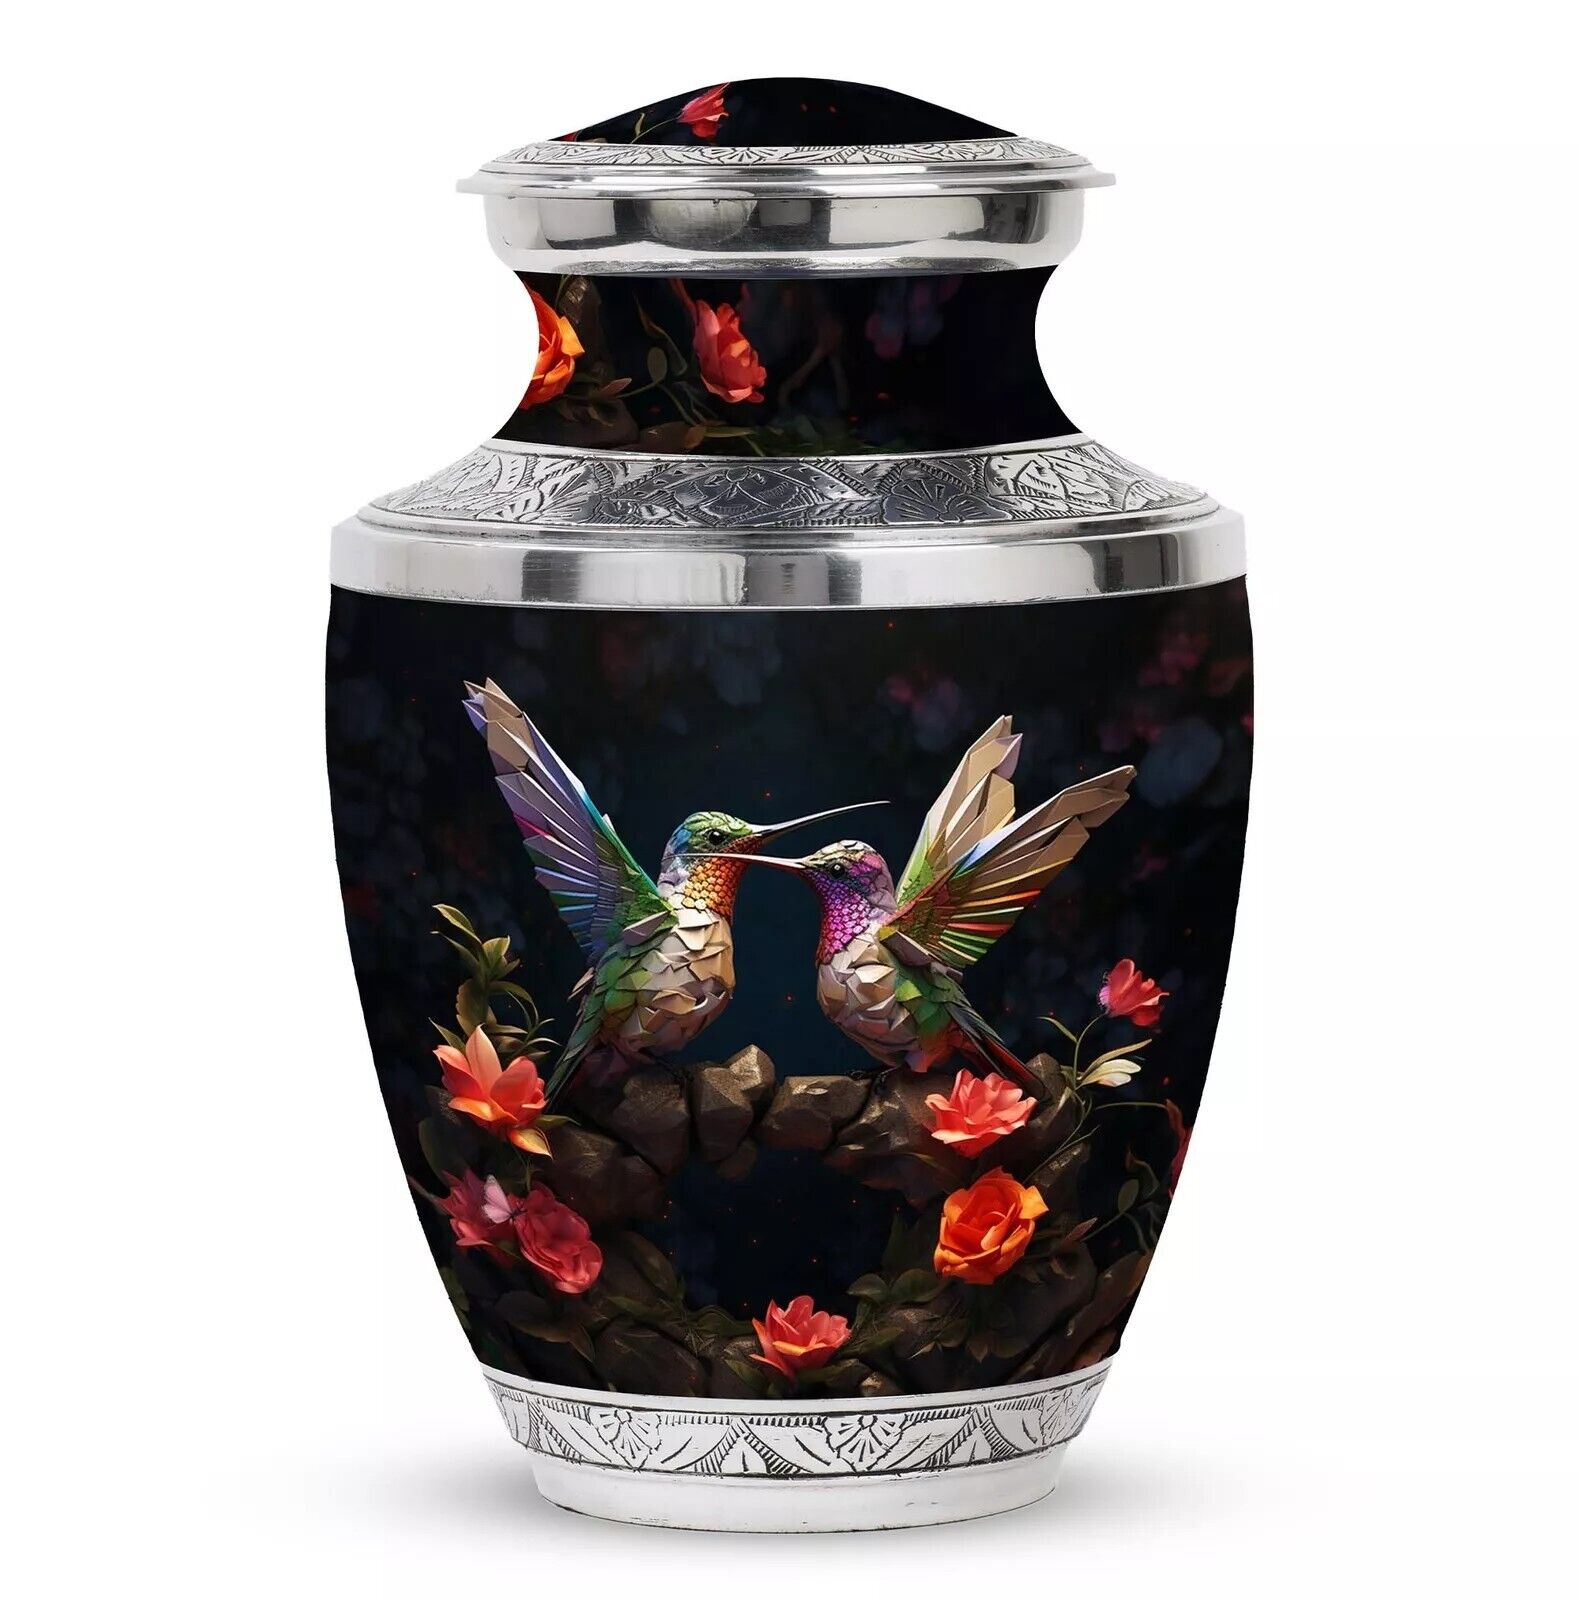 Humming Bird Sitting On Rock Large Urn Handcrafted Human Ashes Funeral Burial